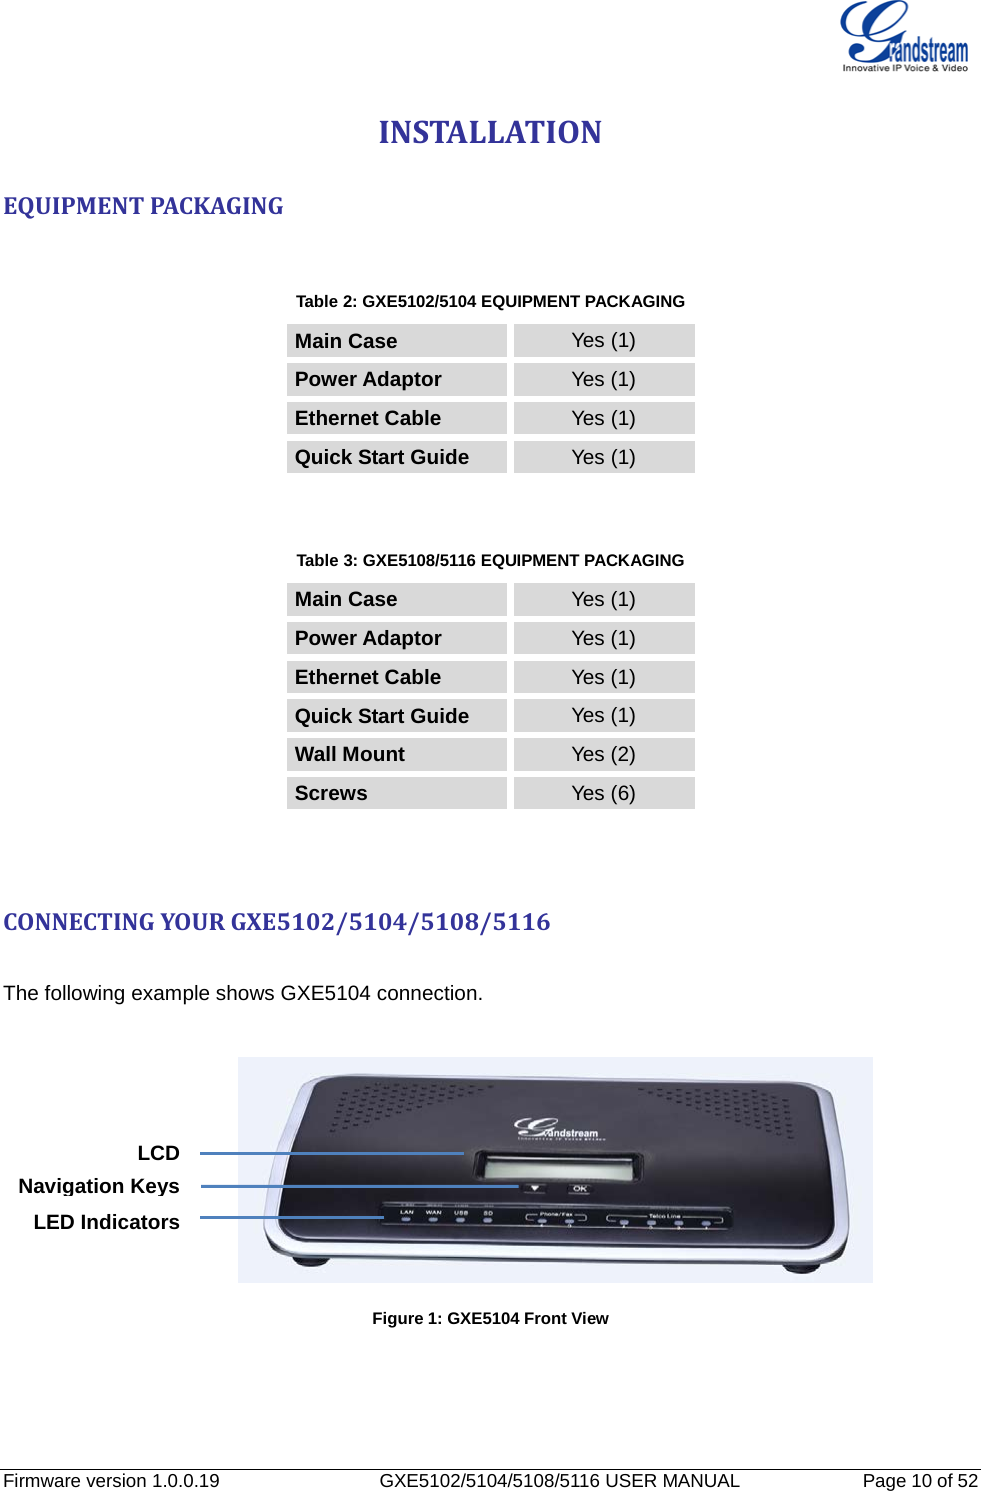   Firmware version 1.0.0.19                   GXE5102/5104/5108/5116 USER MANUAL              Page 10 of 52 INSTALLATION EQUIPMENT PACKAGING  Table 2: GXE5102/5104 EQUIPMENT PACKAGING Main Case Yes (1) Power Adaptor Yes (1) Ethernet Cable Yes (1) Quick Start Guide Yes (1)   Table 3: GXE5108/5116 EQUIPMENT PACKAGING Main Case Yes (1) Power Adaptor Yes (1) Ethernet Cable Yes (1) Quick Start Guide Yes (1) Wall Mount Yes (2) Screws Yes (6)   CONNECTING YOUR GXE5102/5104/5108/5116  The following example shows GXE5104 connection.          Figure 1: GXE5104 Front View   LCD  Navigation Keys LED Indicators 